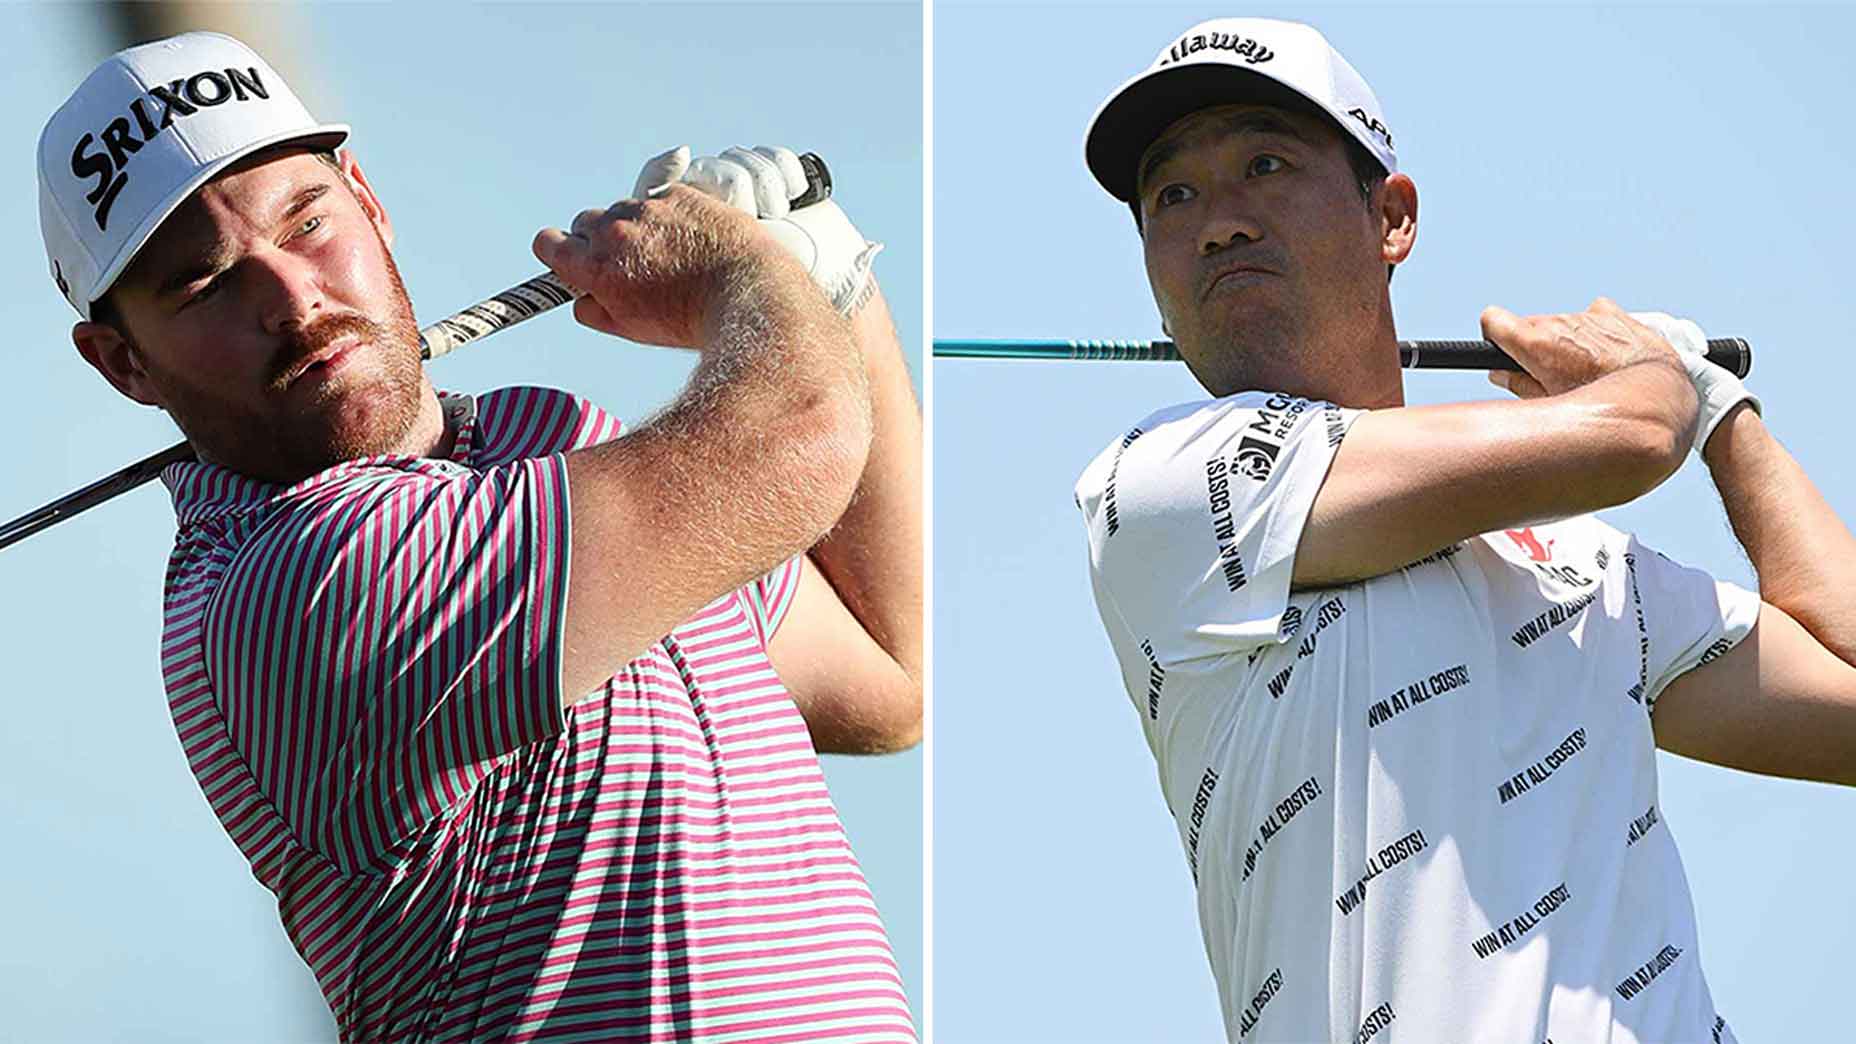 2 pros confront each other at Mexico Open. But severity depends on who ...